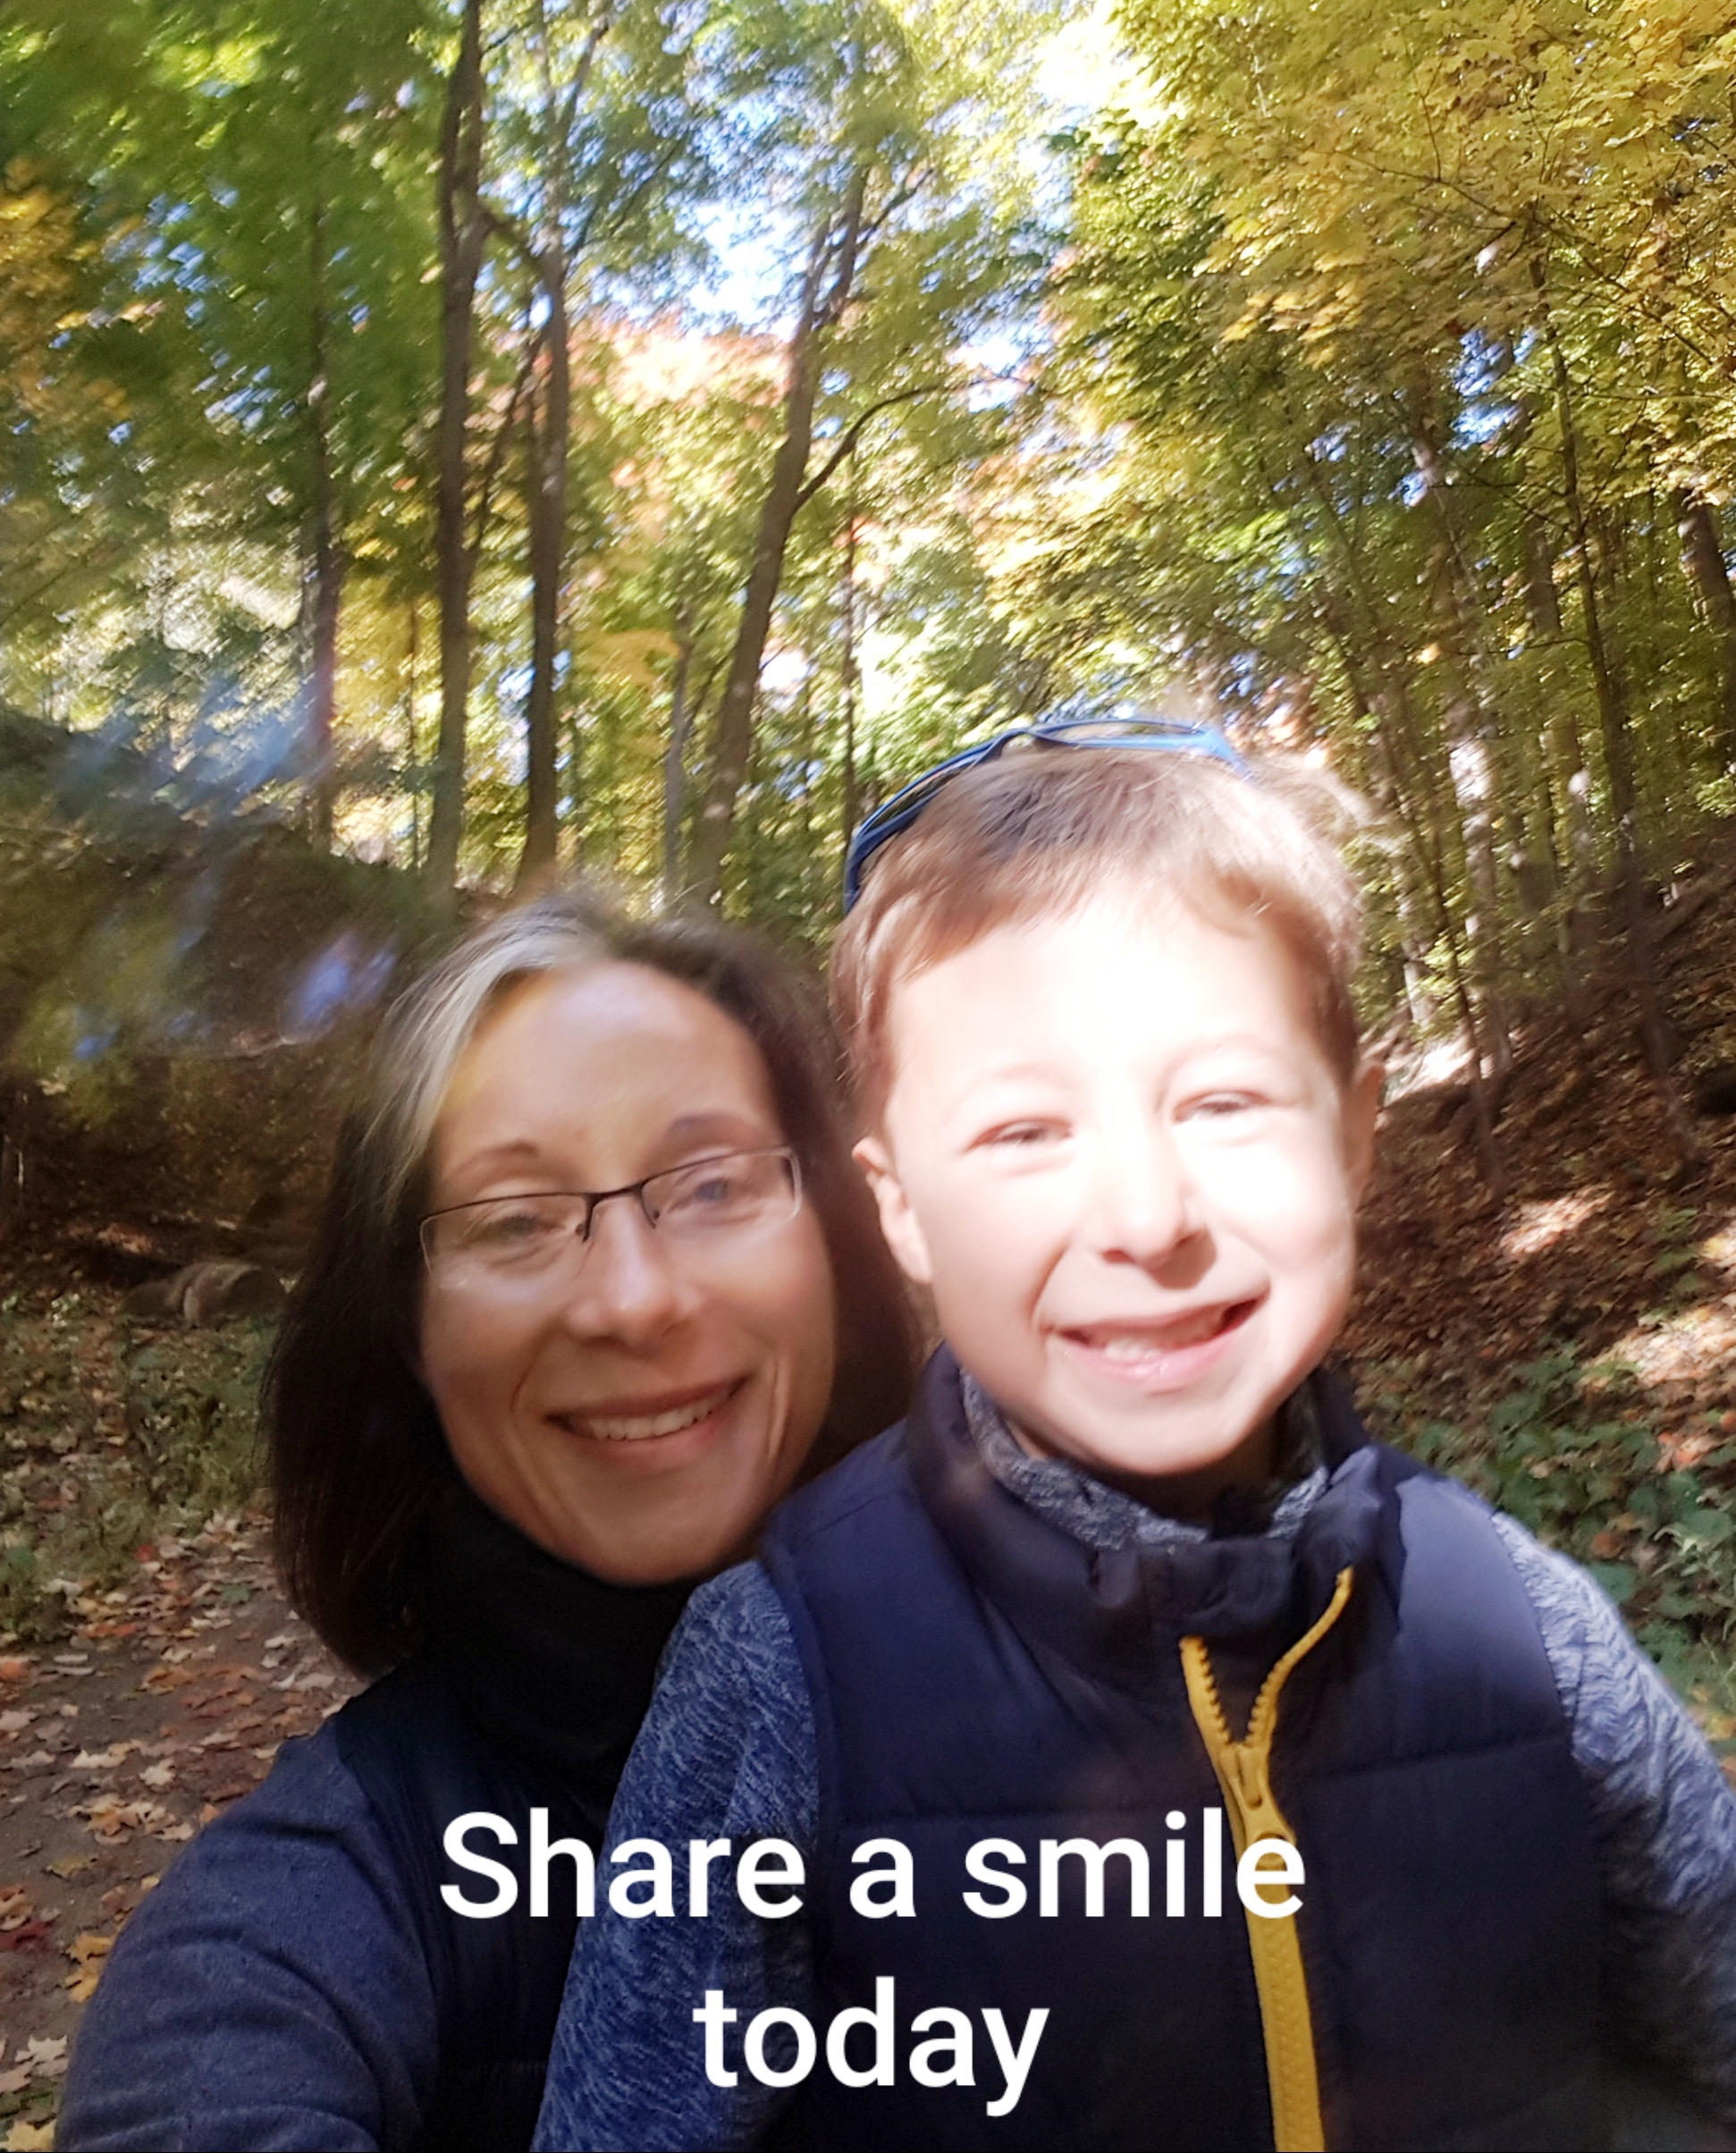 A woman and her young son smile at the camera in front of a tree-lined path. Words at the bottom say "Share a smile"